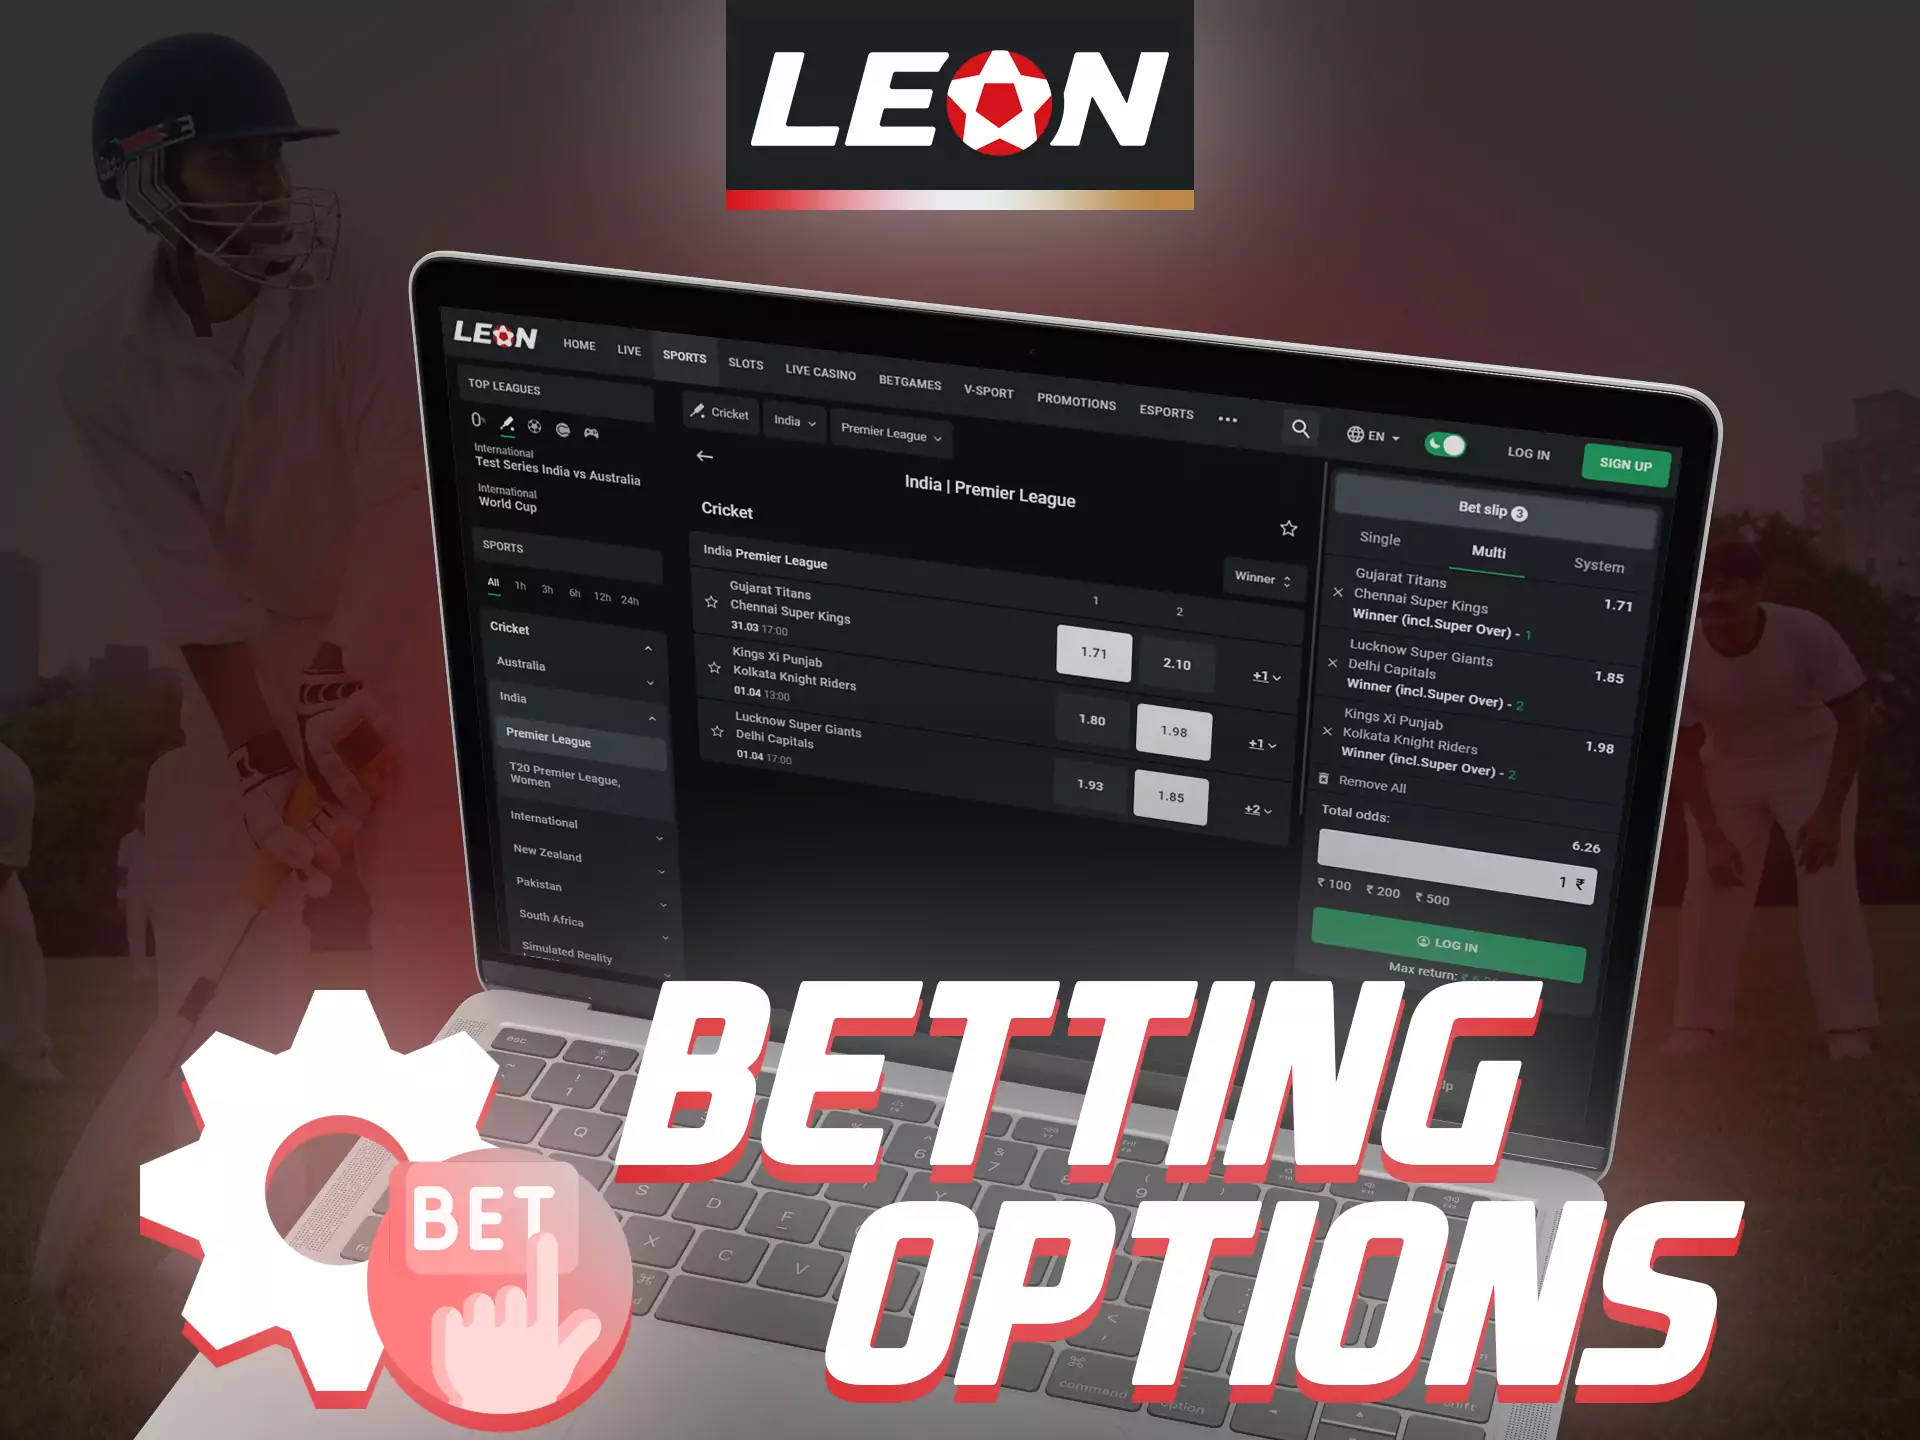 Leonbet offers various options for sports betting.